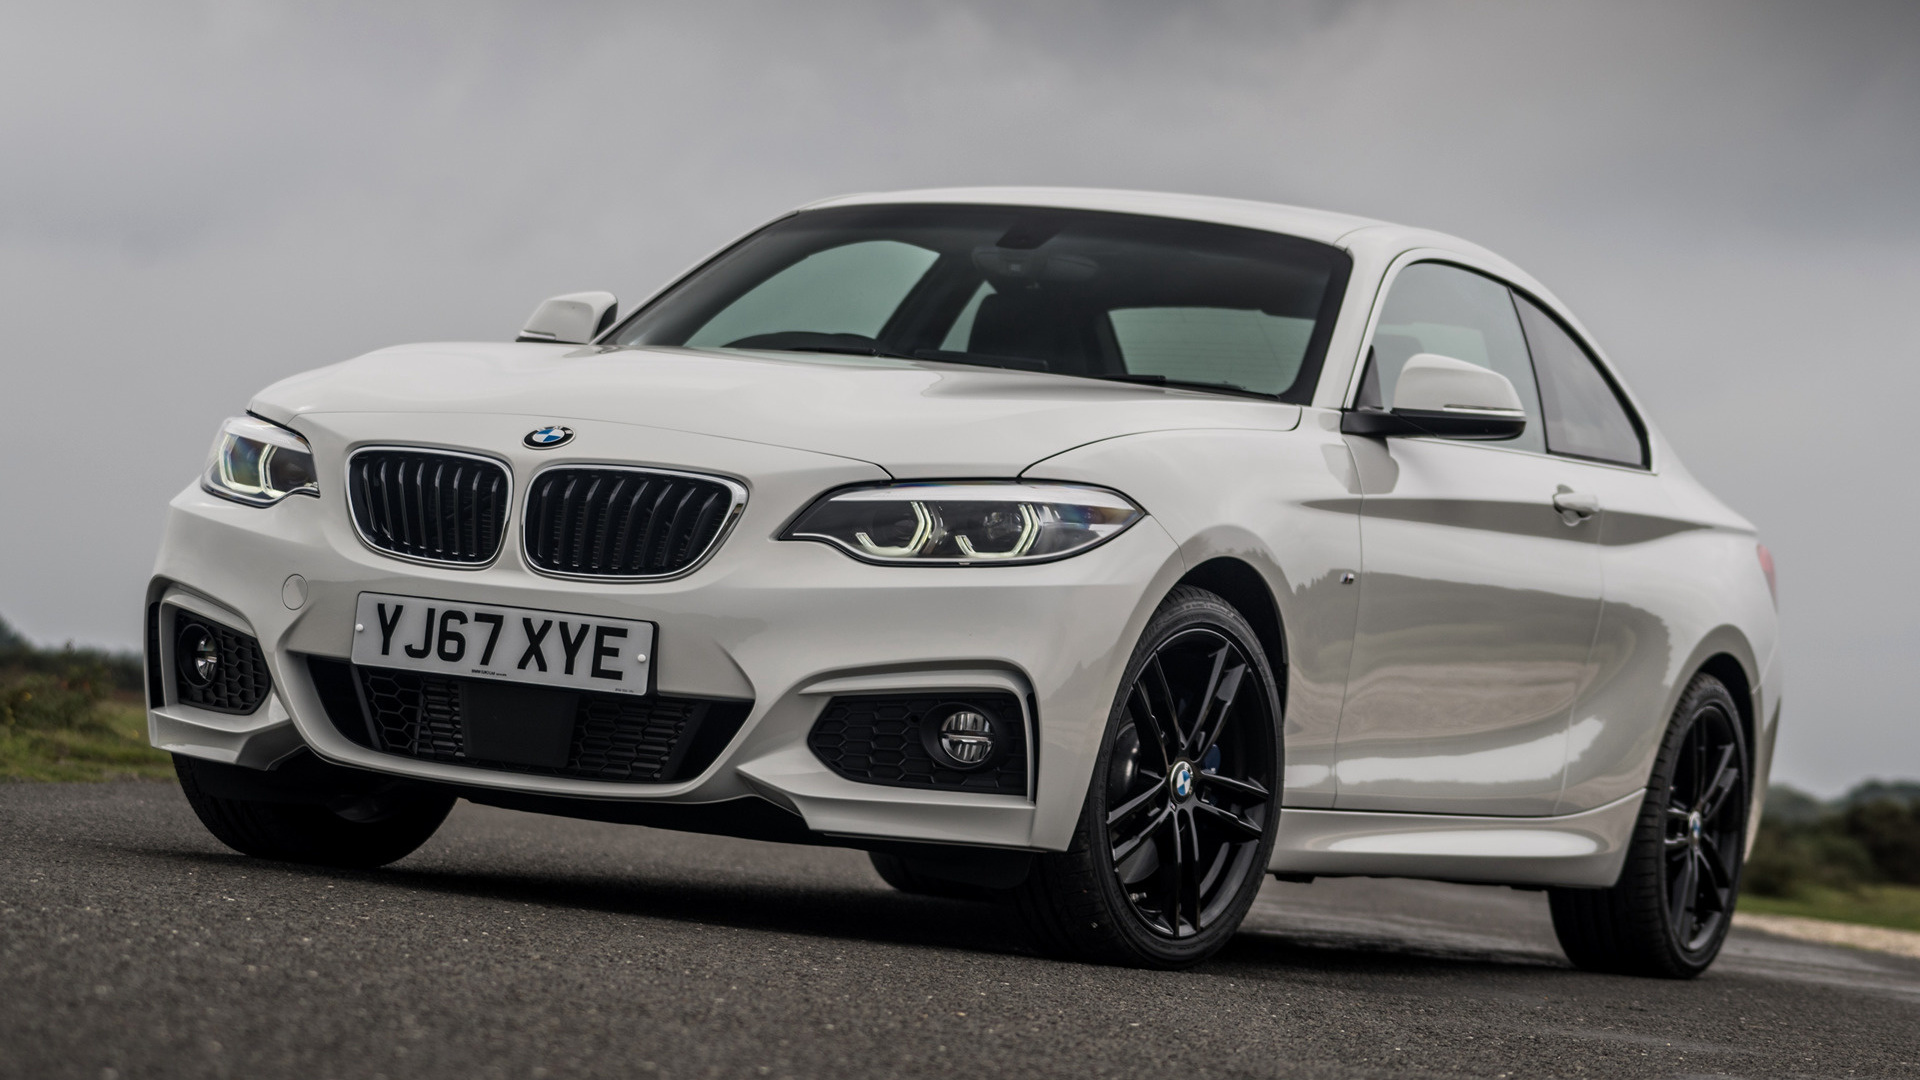 2017 BMW 2 Series Coupe M Sport (UK) - Wallpapers and HD Images | Car Pixel